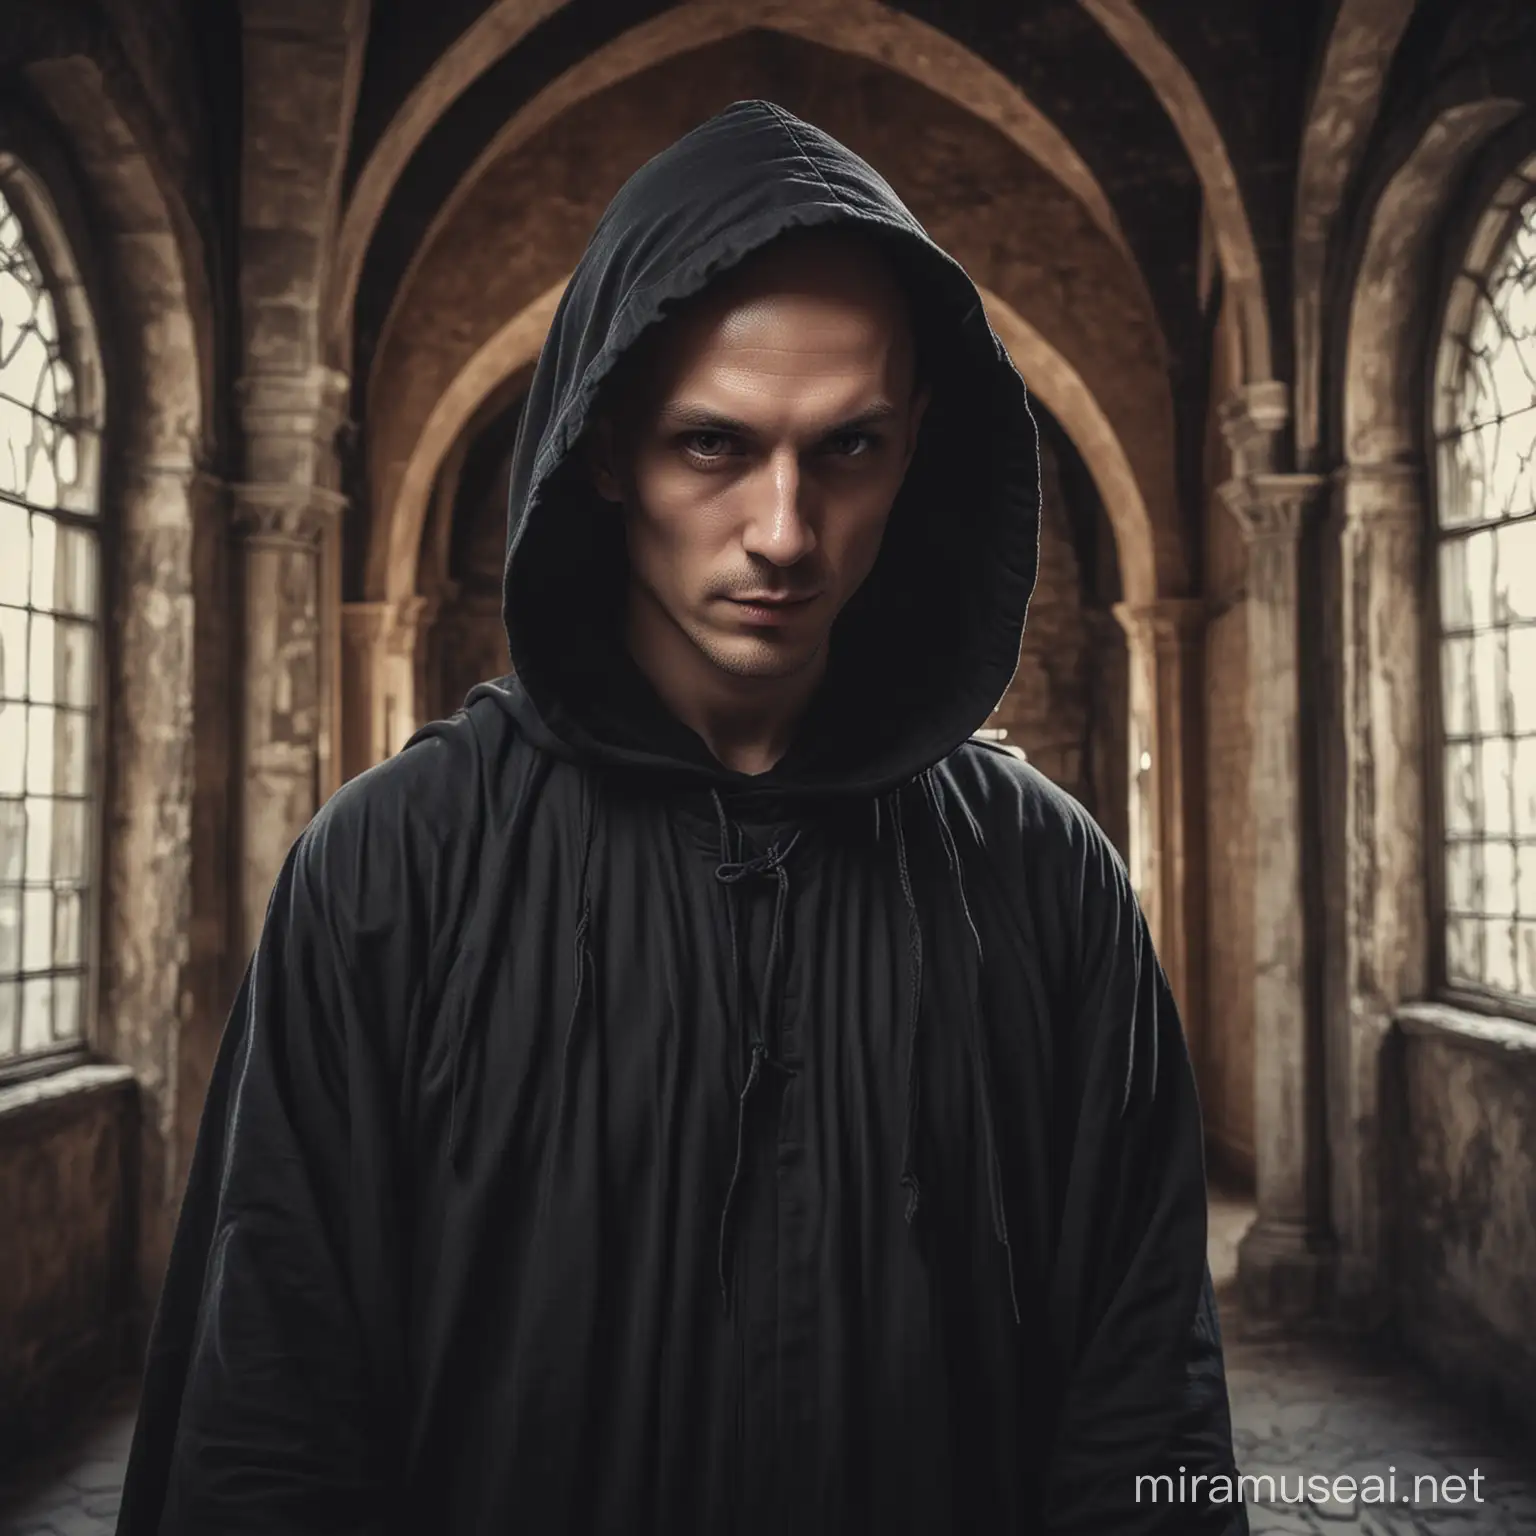 Sinister Portrait of Bald Zealot in Black Hooded Robe within Castle Setting